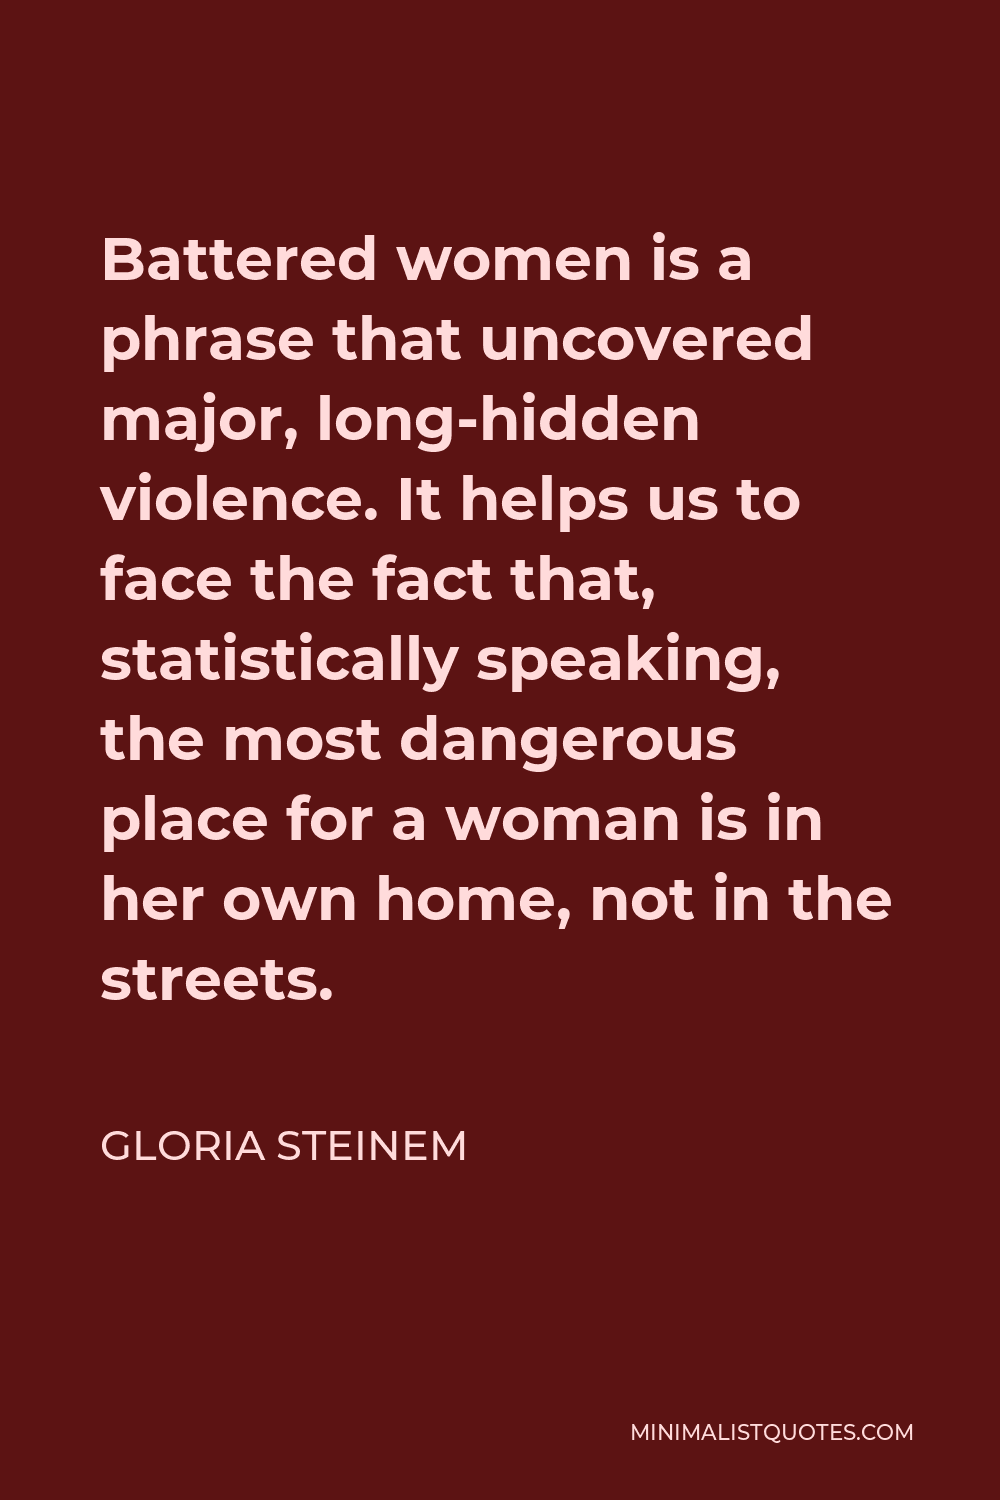 Gloria Steinem Quote - Battered women is a phrase that uncovered major, long-hidden violence. It helps us to face the fact that, statistically speaking, the most dangerous place for a woman is in her own home, not in the streets.